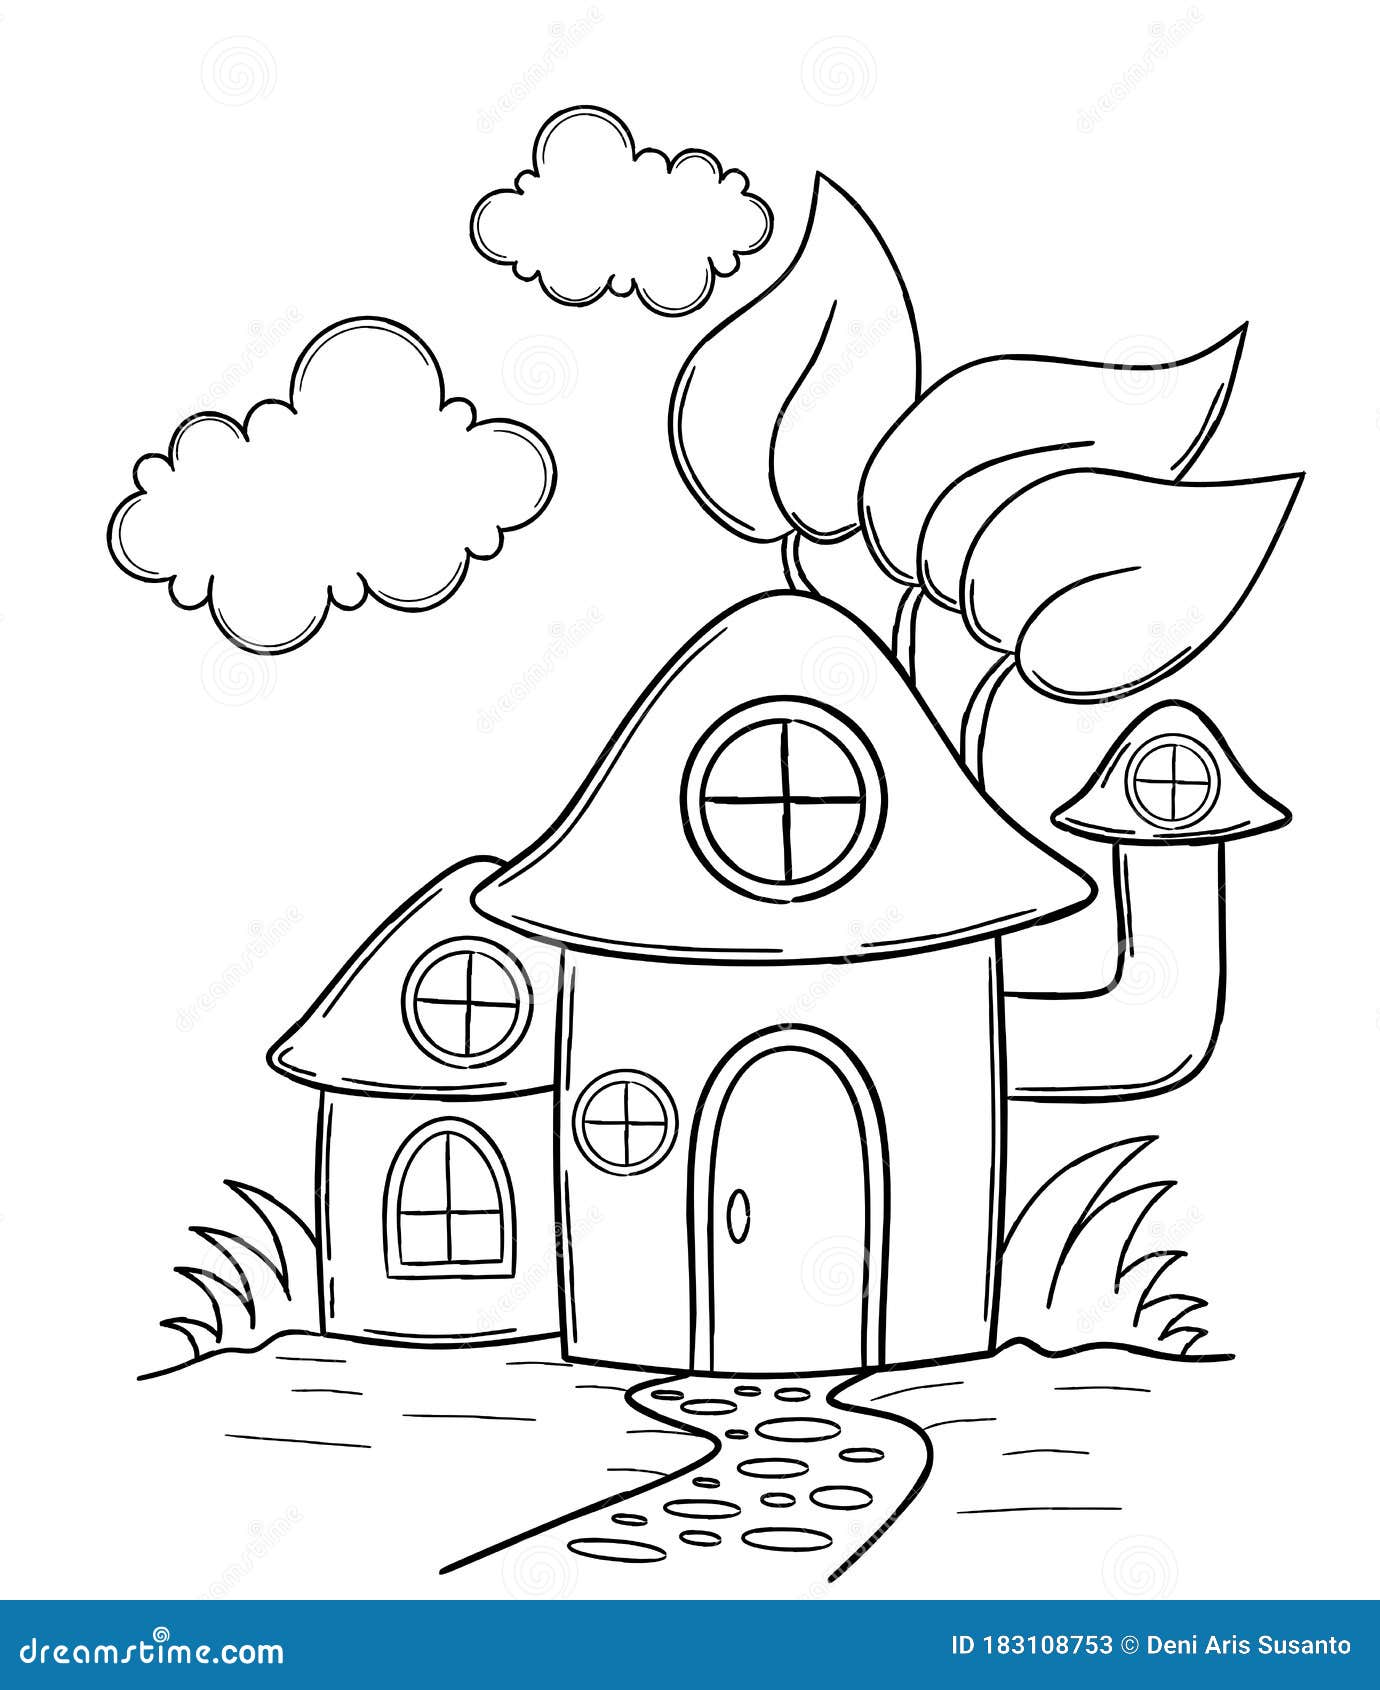 Coloring Page with Mushroom House. Stock Illustration - Illustration of